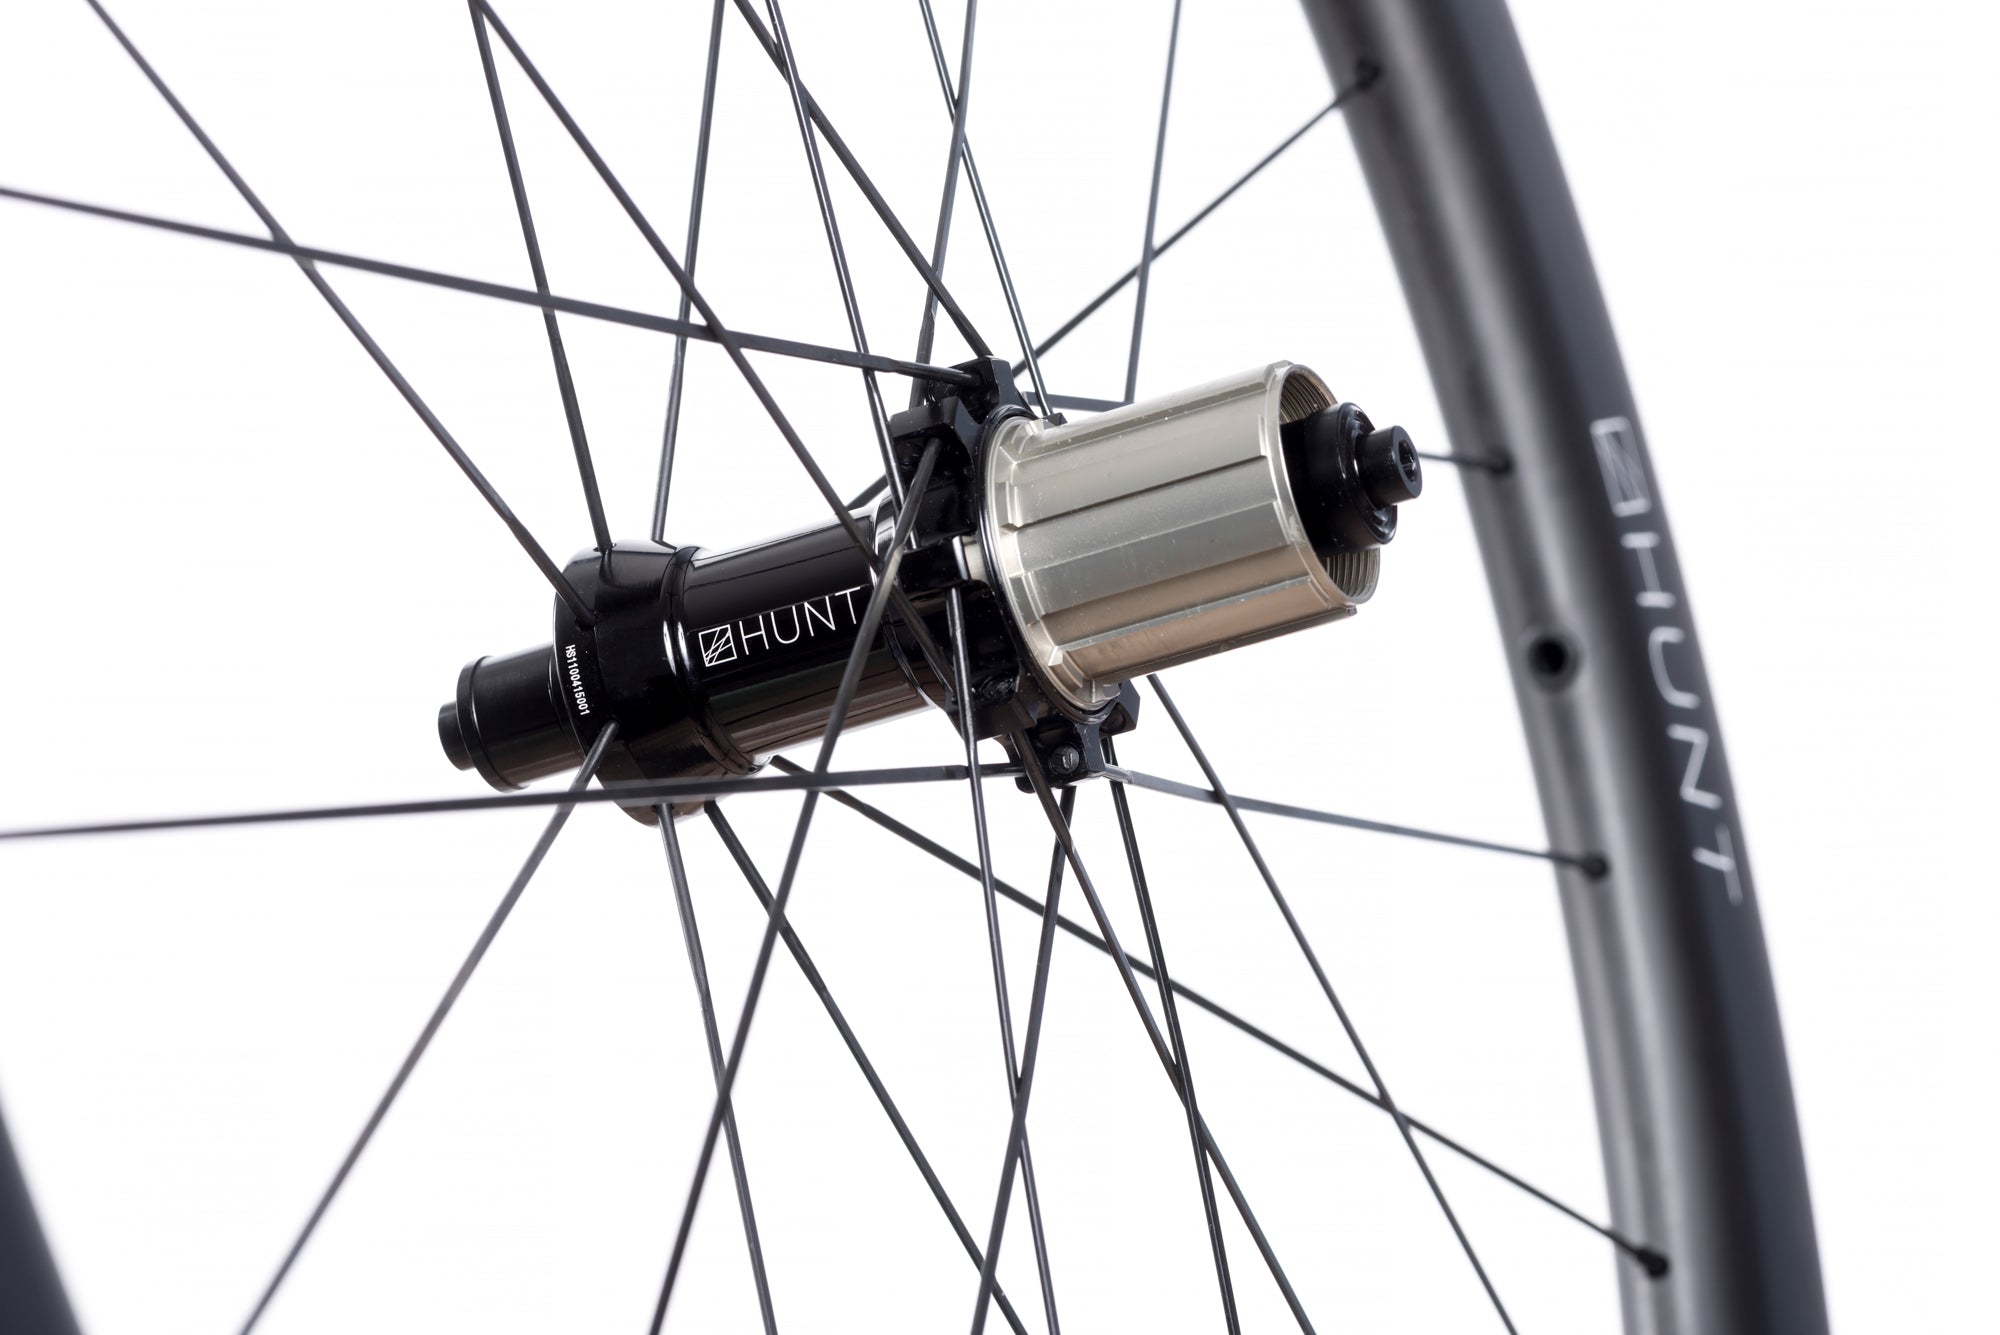 <h1>Hubs</h1><i>Precision machined straight pull hubs and spokes add strength and enhance power transfer meaning all your force pushes you forwards. Large 15mm diameter hub axles for sprinting and out-of-saddle climbing responsiveness. Circular dropout interface steps add extra stiffness.</i>